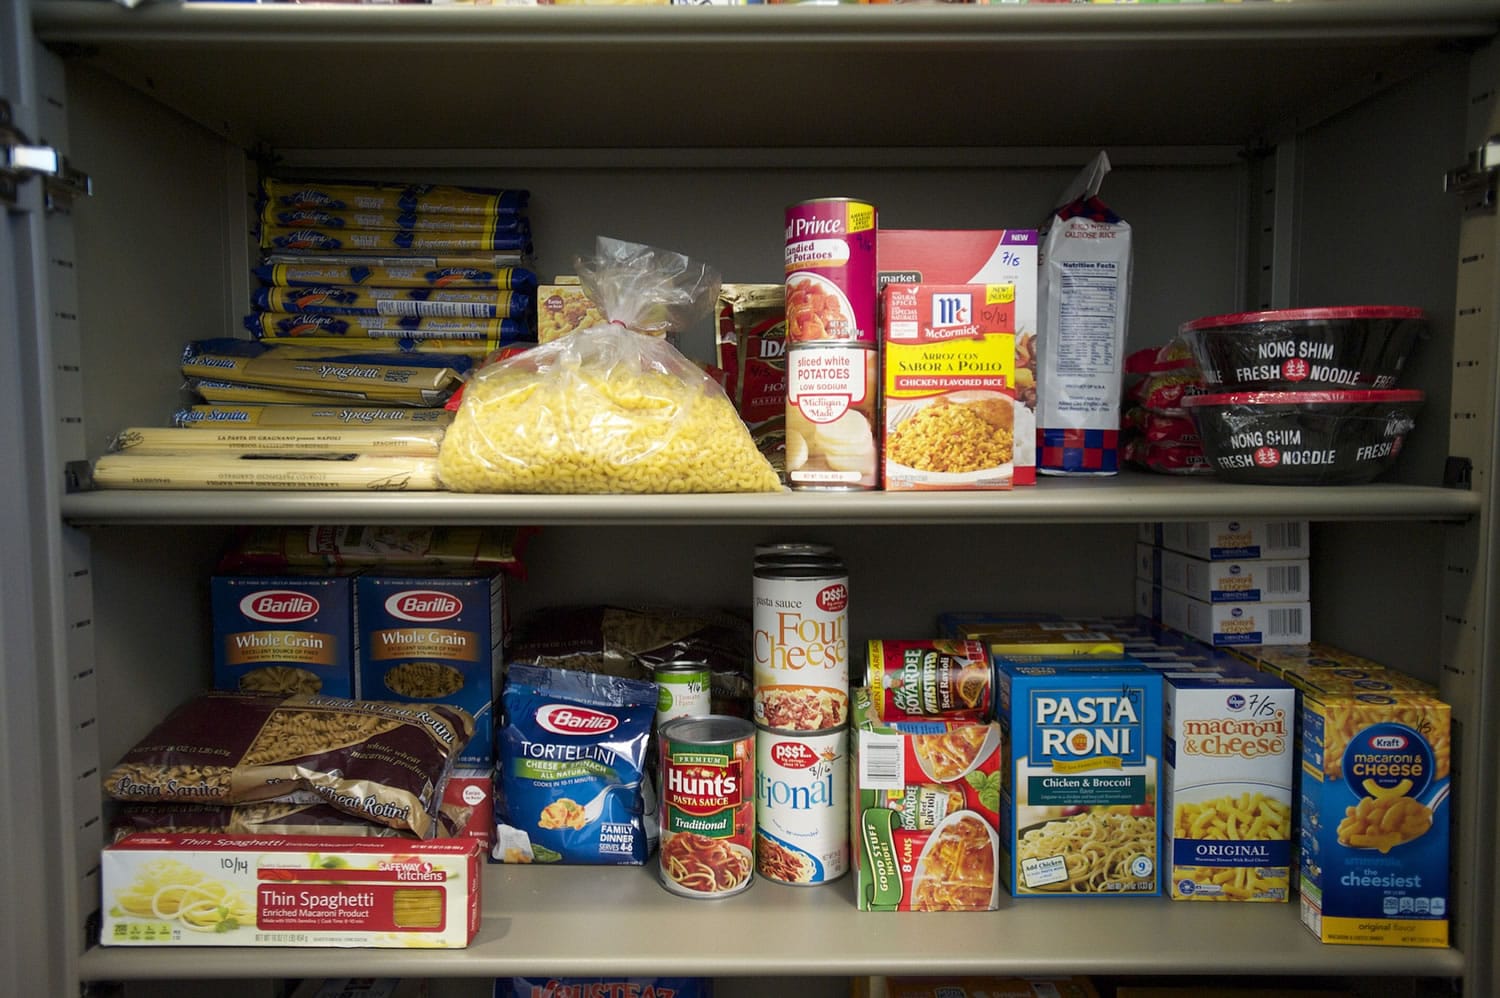 The Cougar Food Pantry at Washington State University Vancouver is meant to feed WSUV students who find themselves in need. A food drive is set for the campus on Nov.